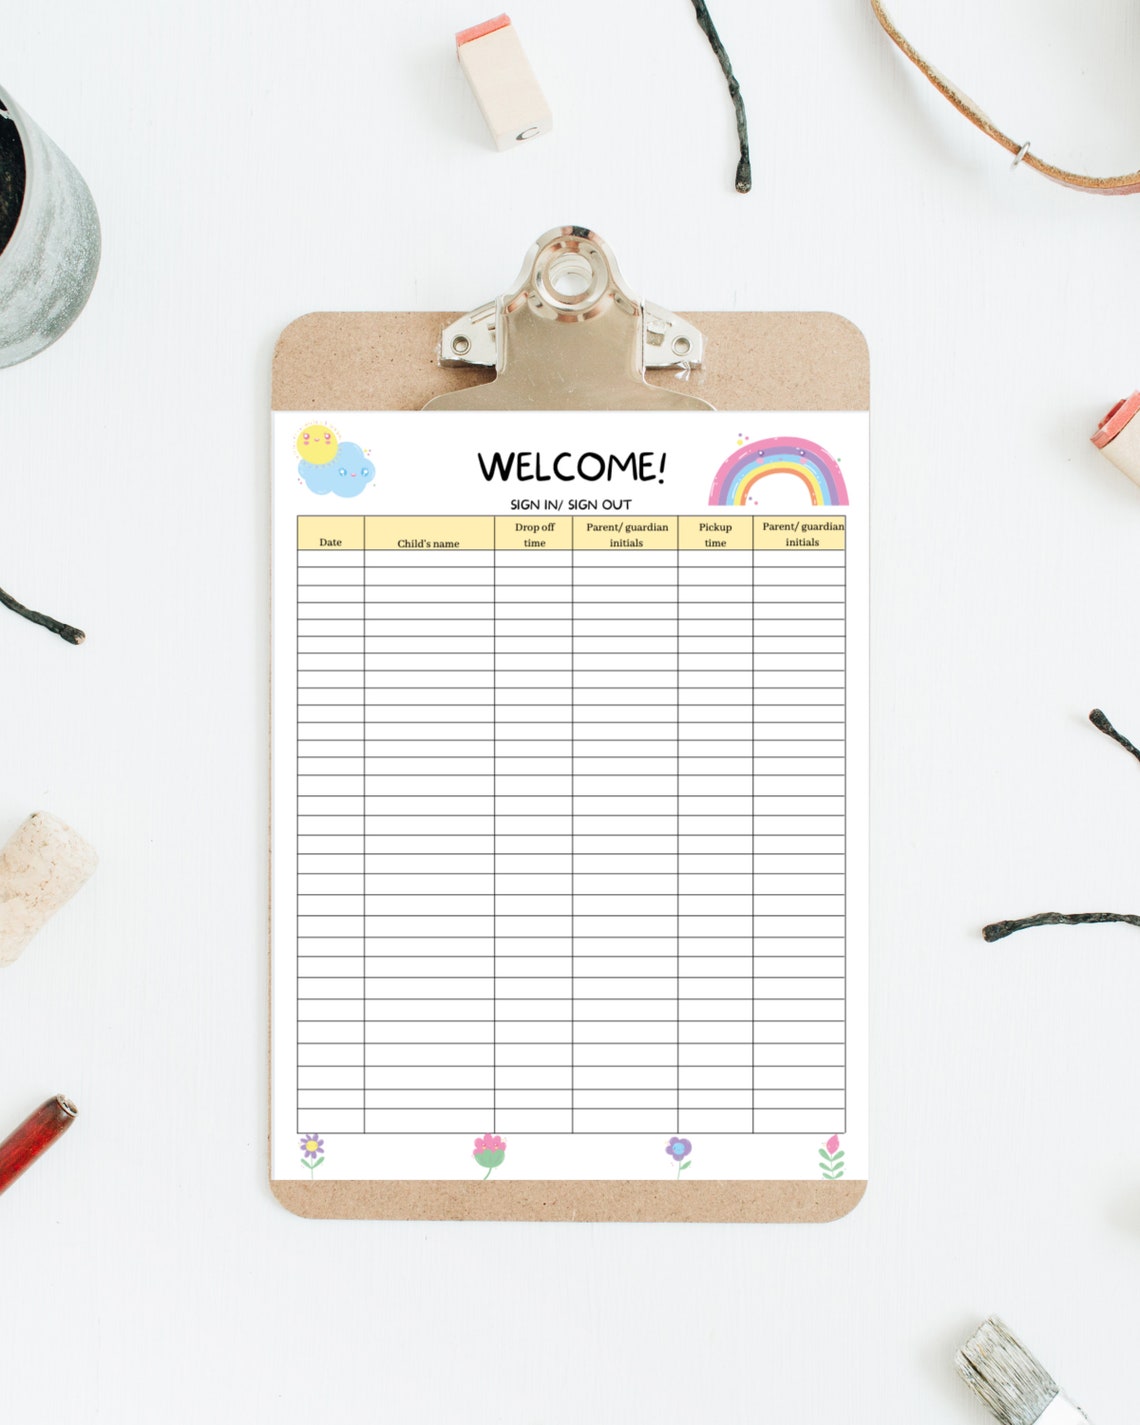 daycare-sign-in-out-sheet-digital-download-pdf-daily-us-etsy